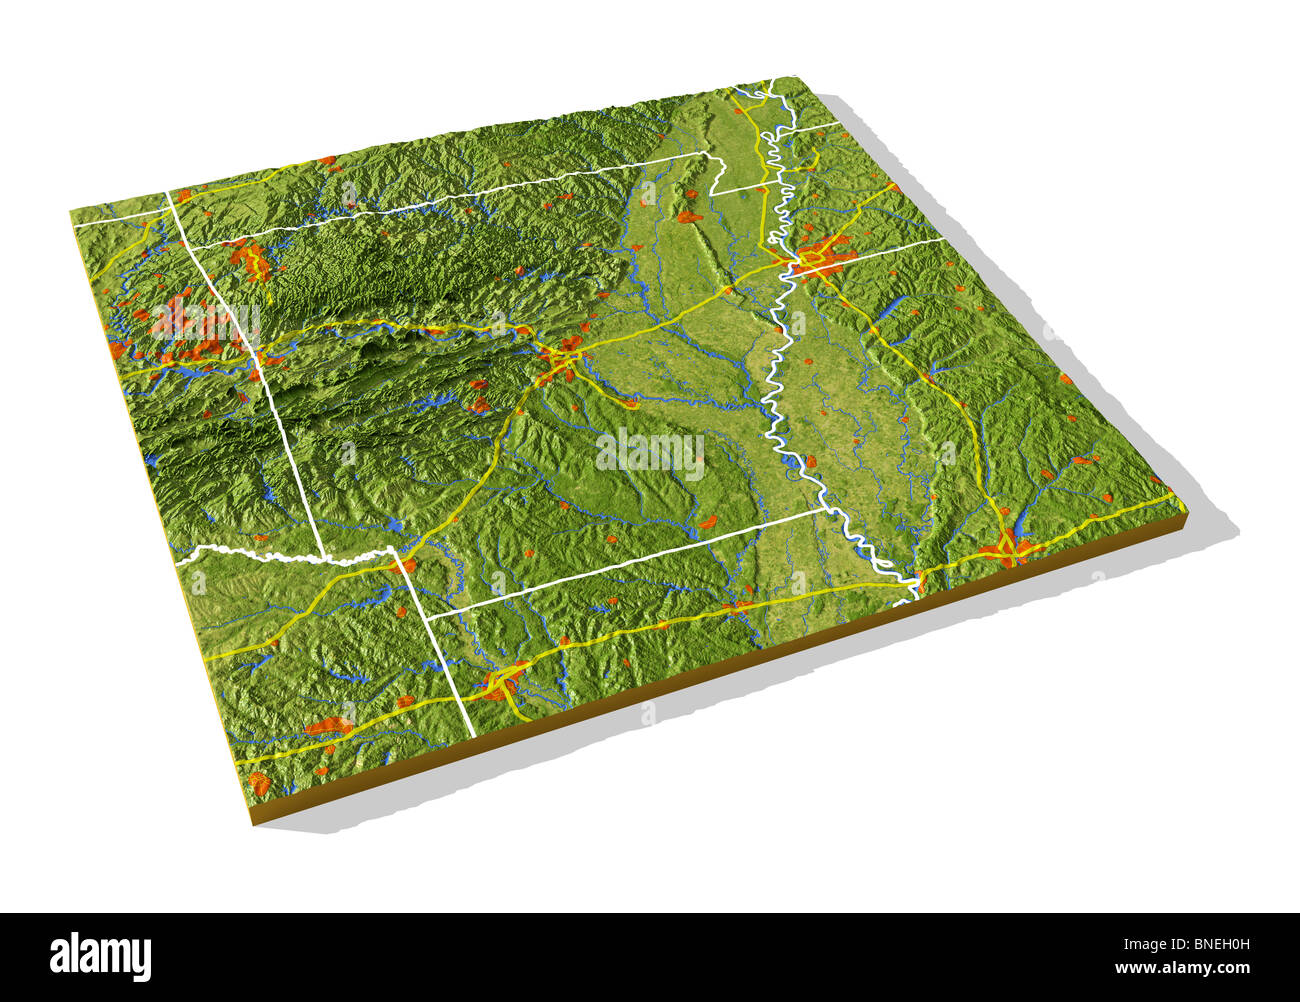 Arkansas, 3D relief map with urban areas, interstate highways and borders. Stock Photo